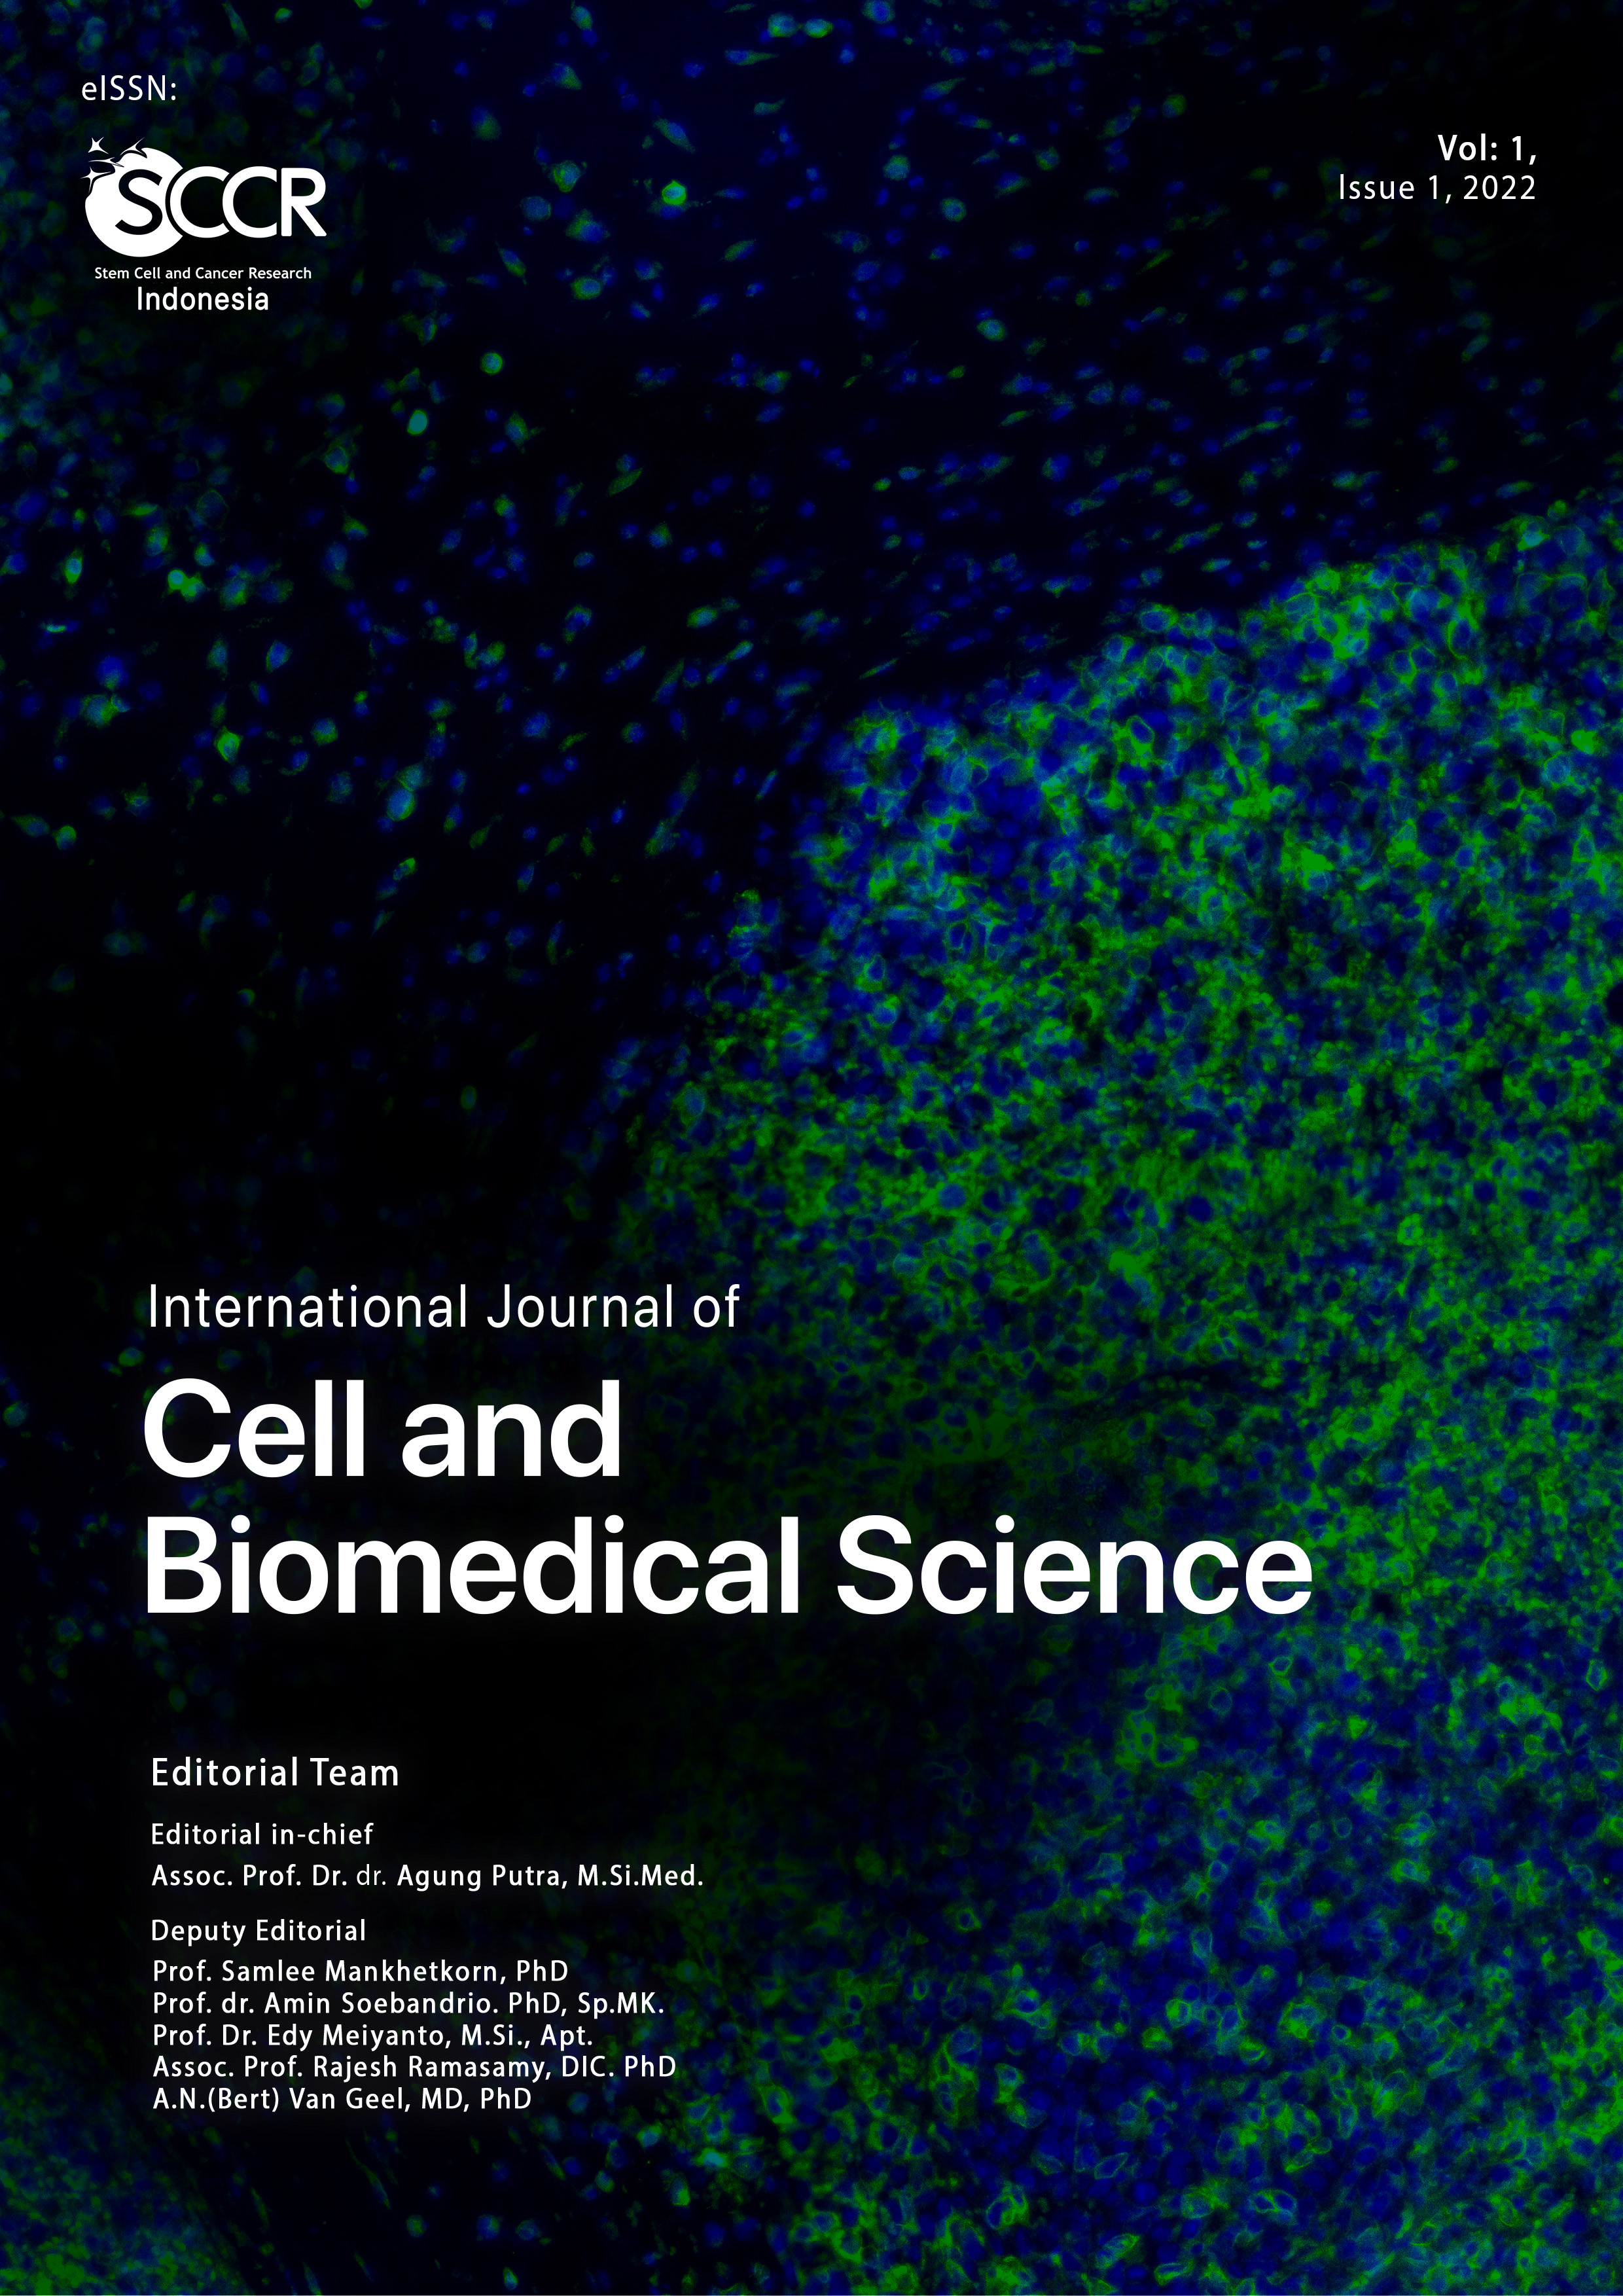 International Journal of Cell and Biomedical Science